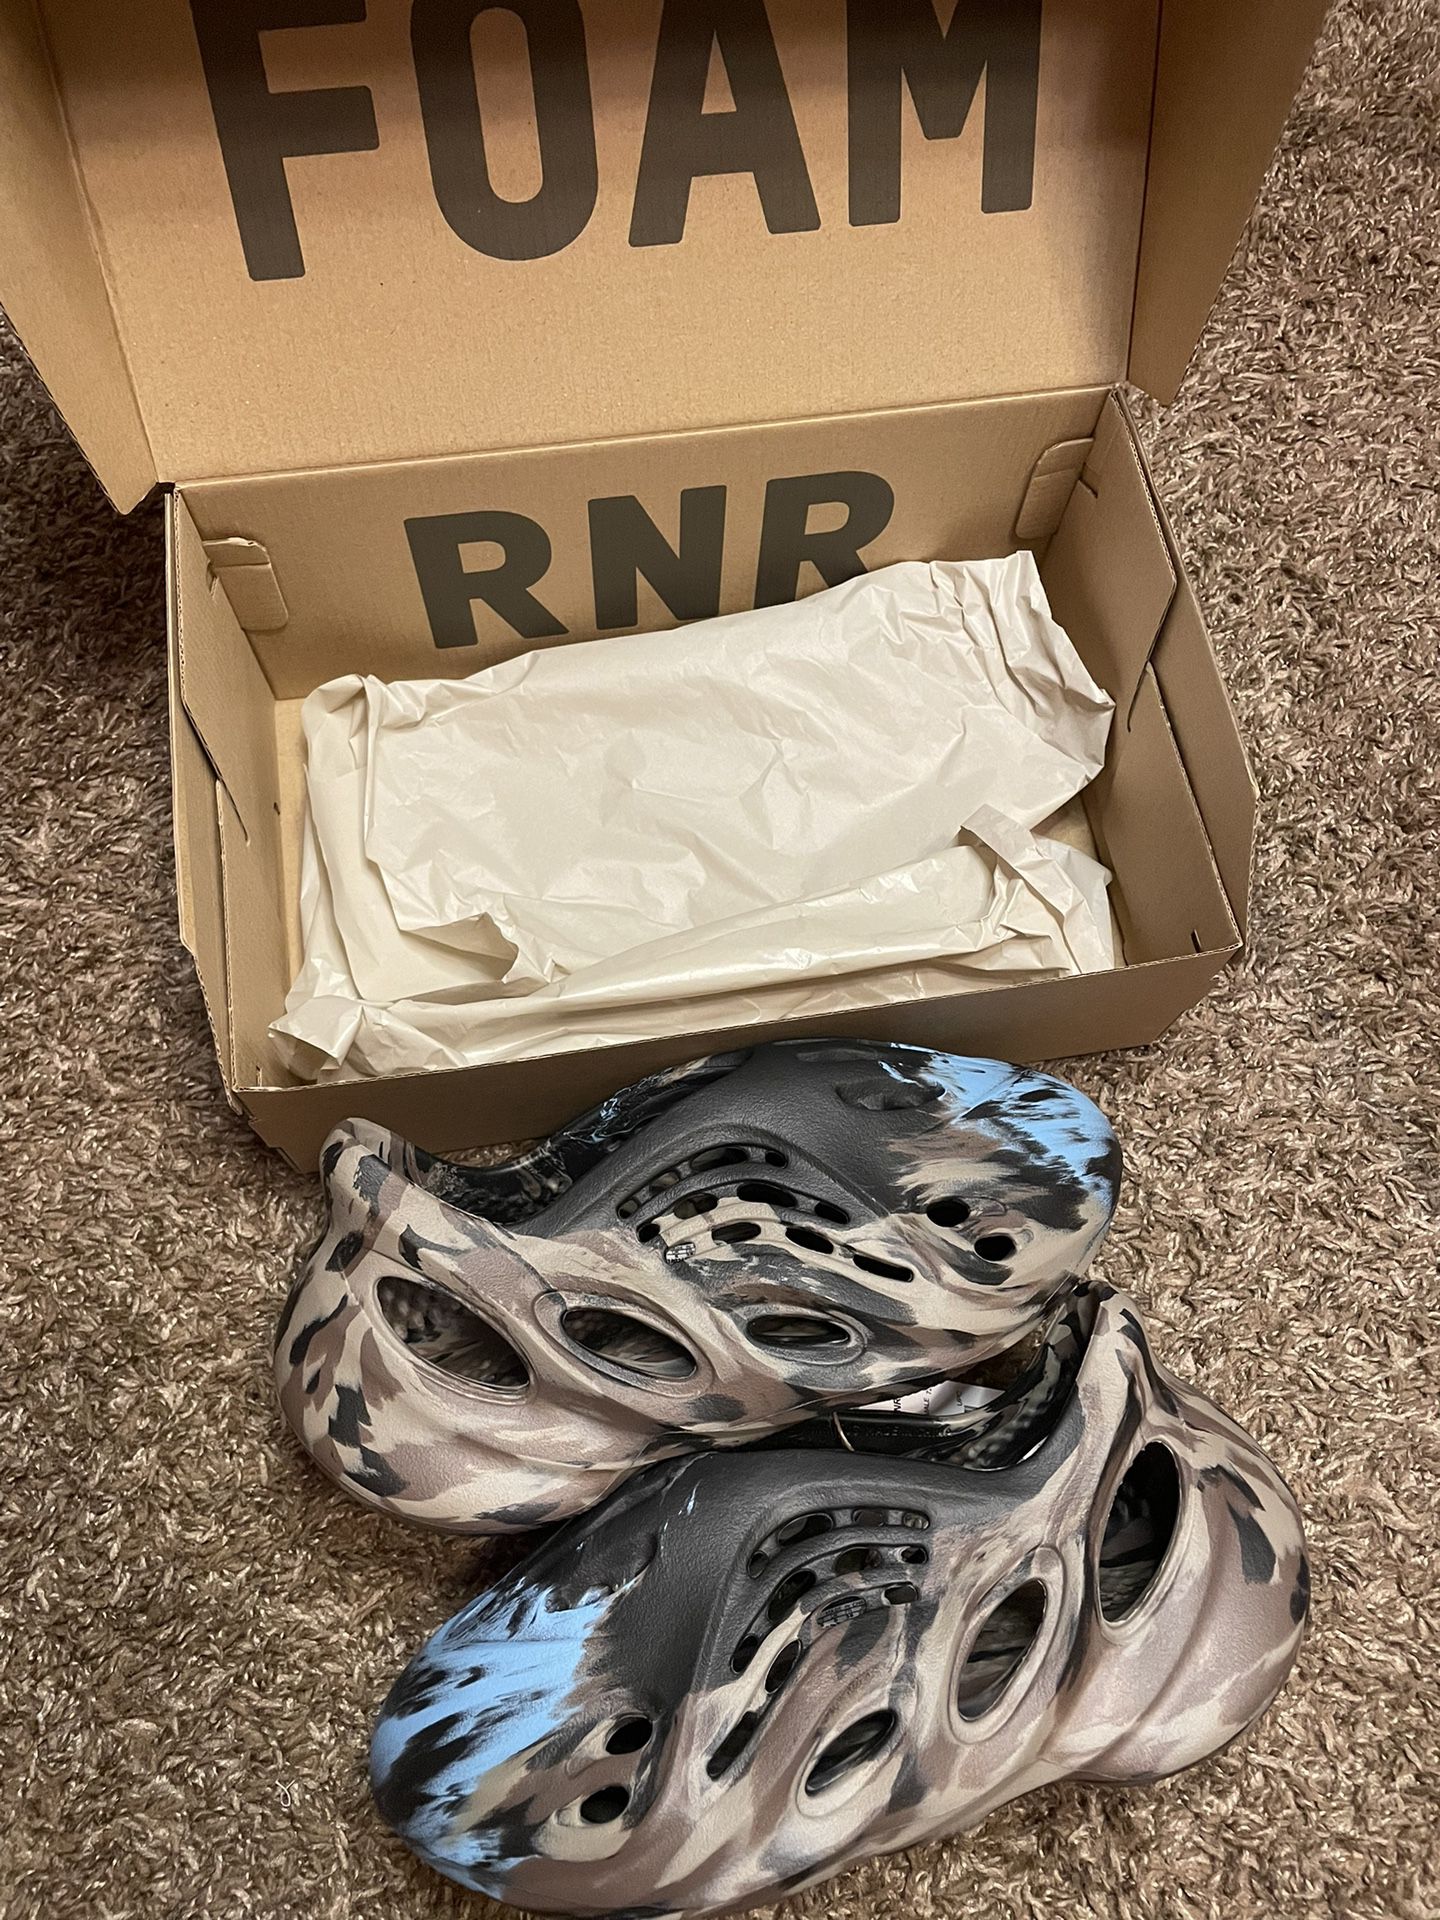 Yeezy Foam Runners MX Cinder Size 5, 6, 9, 13 for Sale in Parma